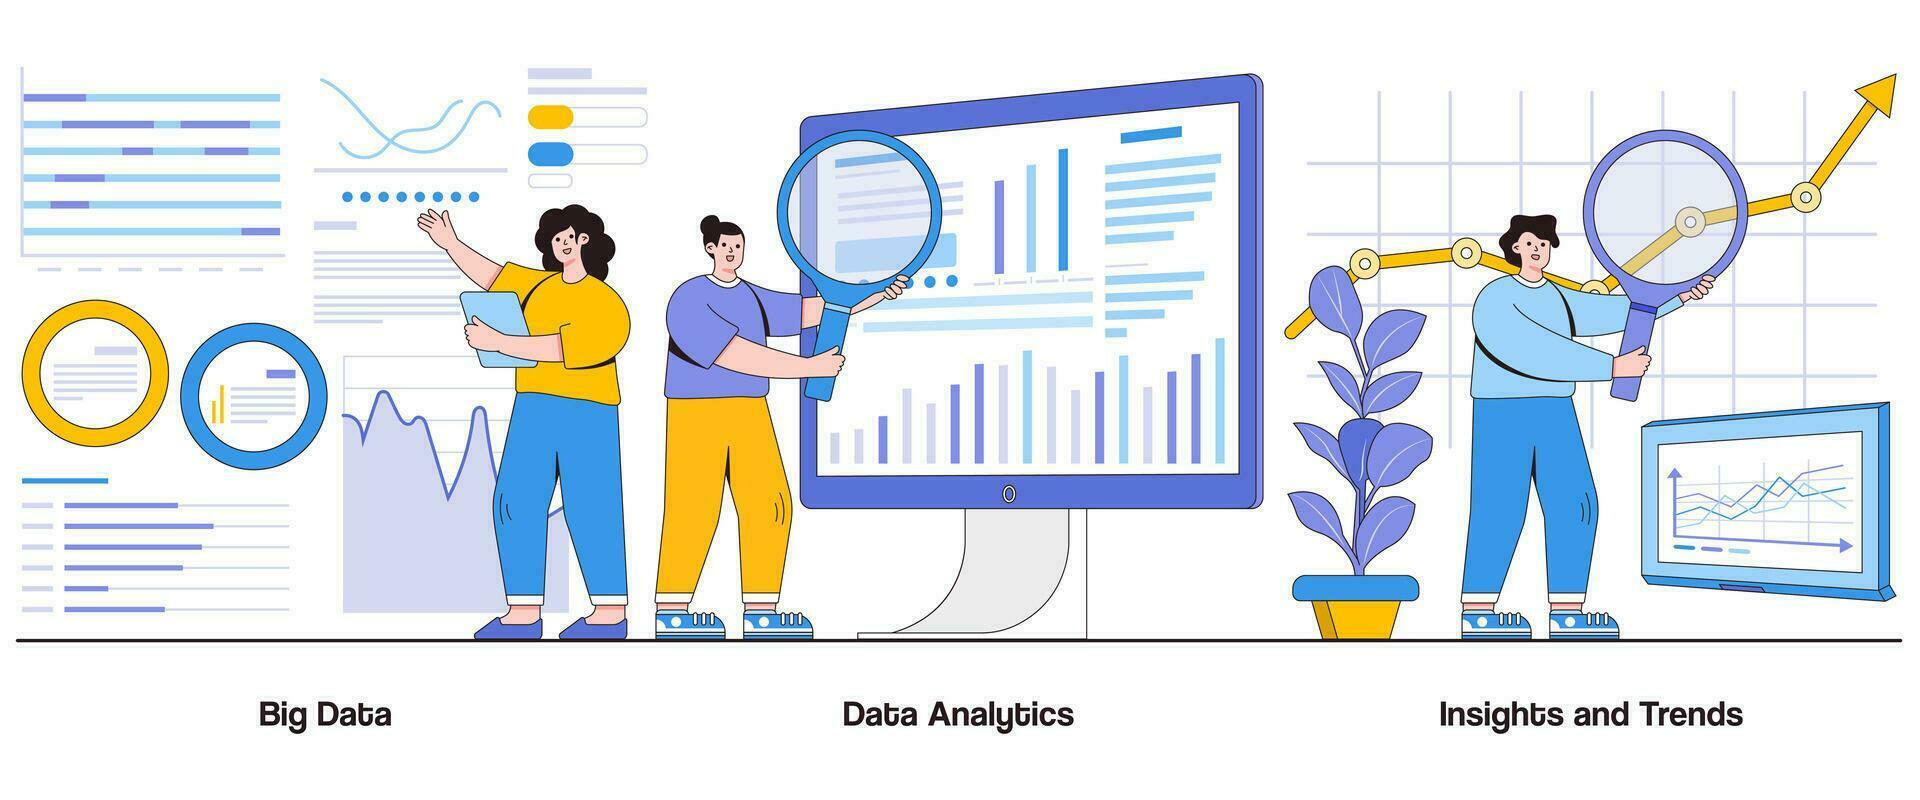 Big Data, Data Analytics, Insights and Trends Concept with Character. Data-Driven Decisions Abstract Vector Illustration Set. Information, Analysis, Business Intelligence Metaphor